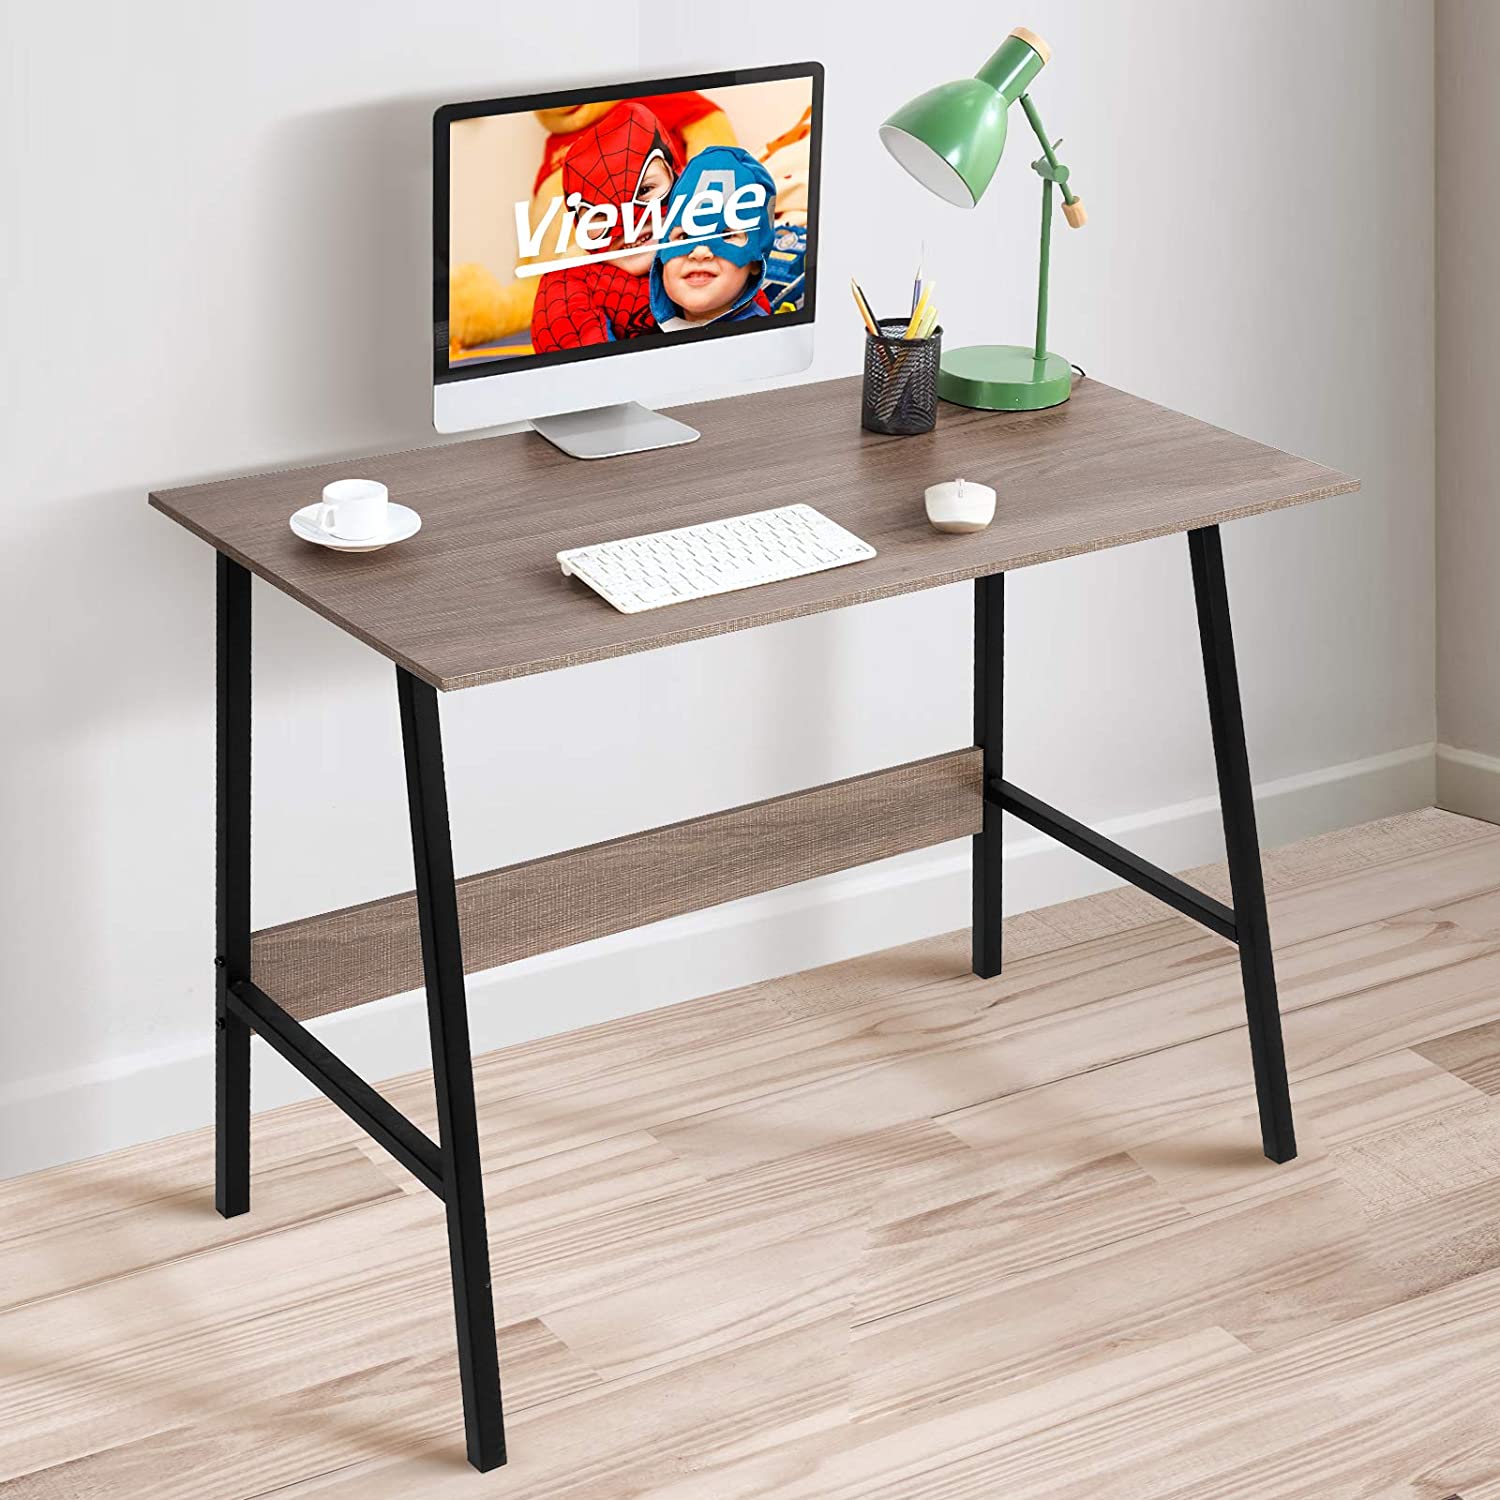 Woodyhome™ Standing Table Wood Nordic Computer PC Laptop